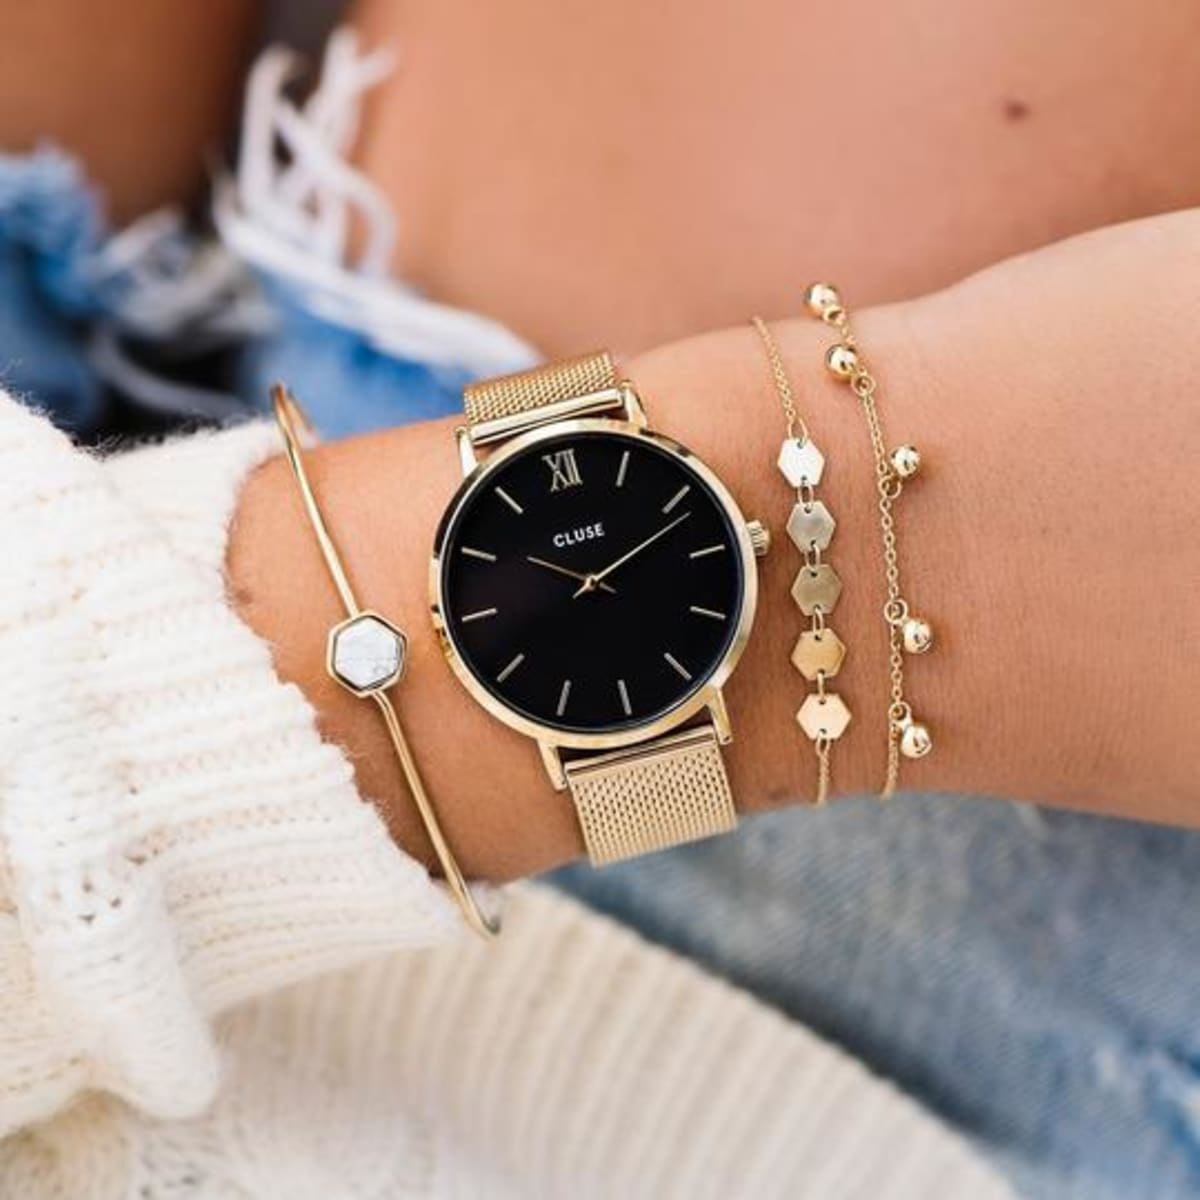 Gold and Black - the perfect colour combo for the party season! With a 33mm case diameter, this is the medium size in the CLUSE range. Fancy a change? This watch would look equally good with a black leather strap for a more understated look. Ask instore for details.